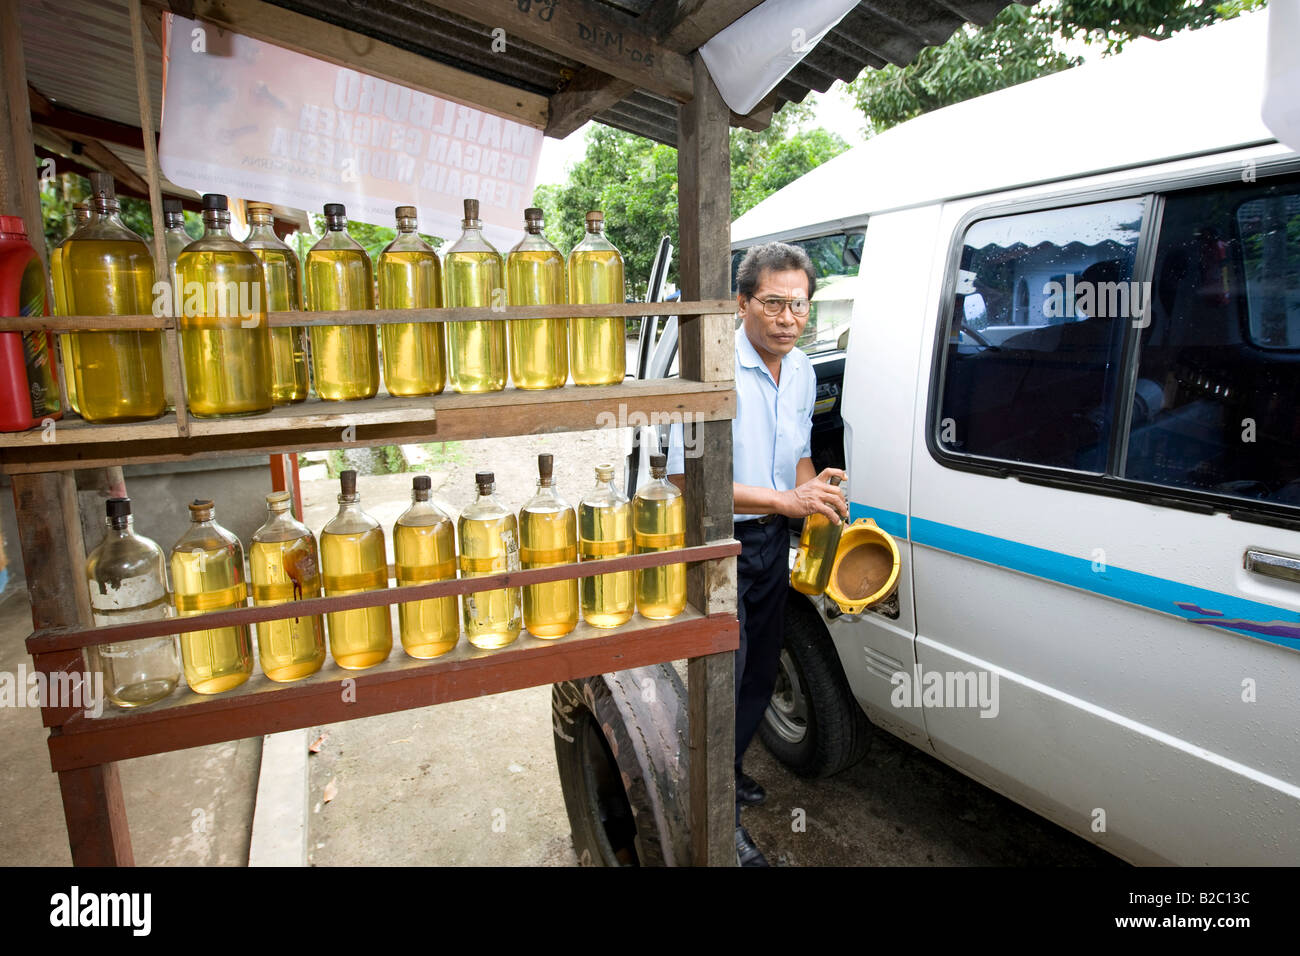 Typical gas station in Asia, petrol stored in glass bottles, car being fueled from glass bottles, Lombok Island, Sunda Islands  Stock Photo